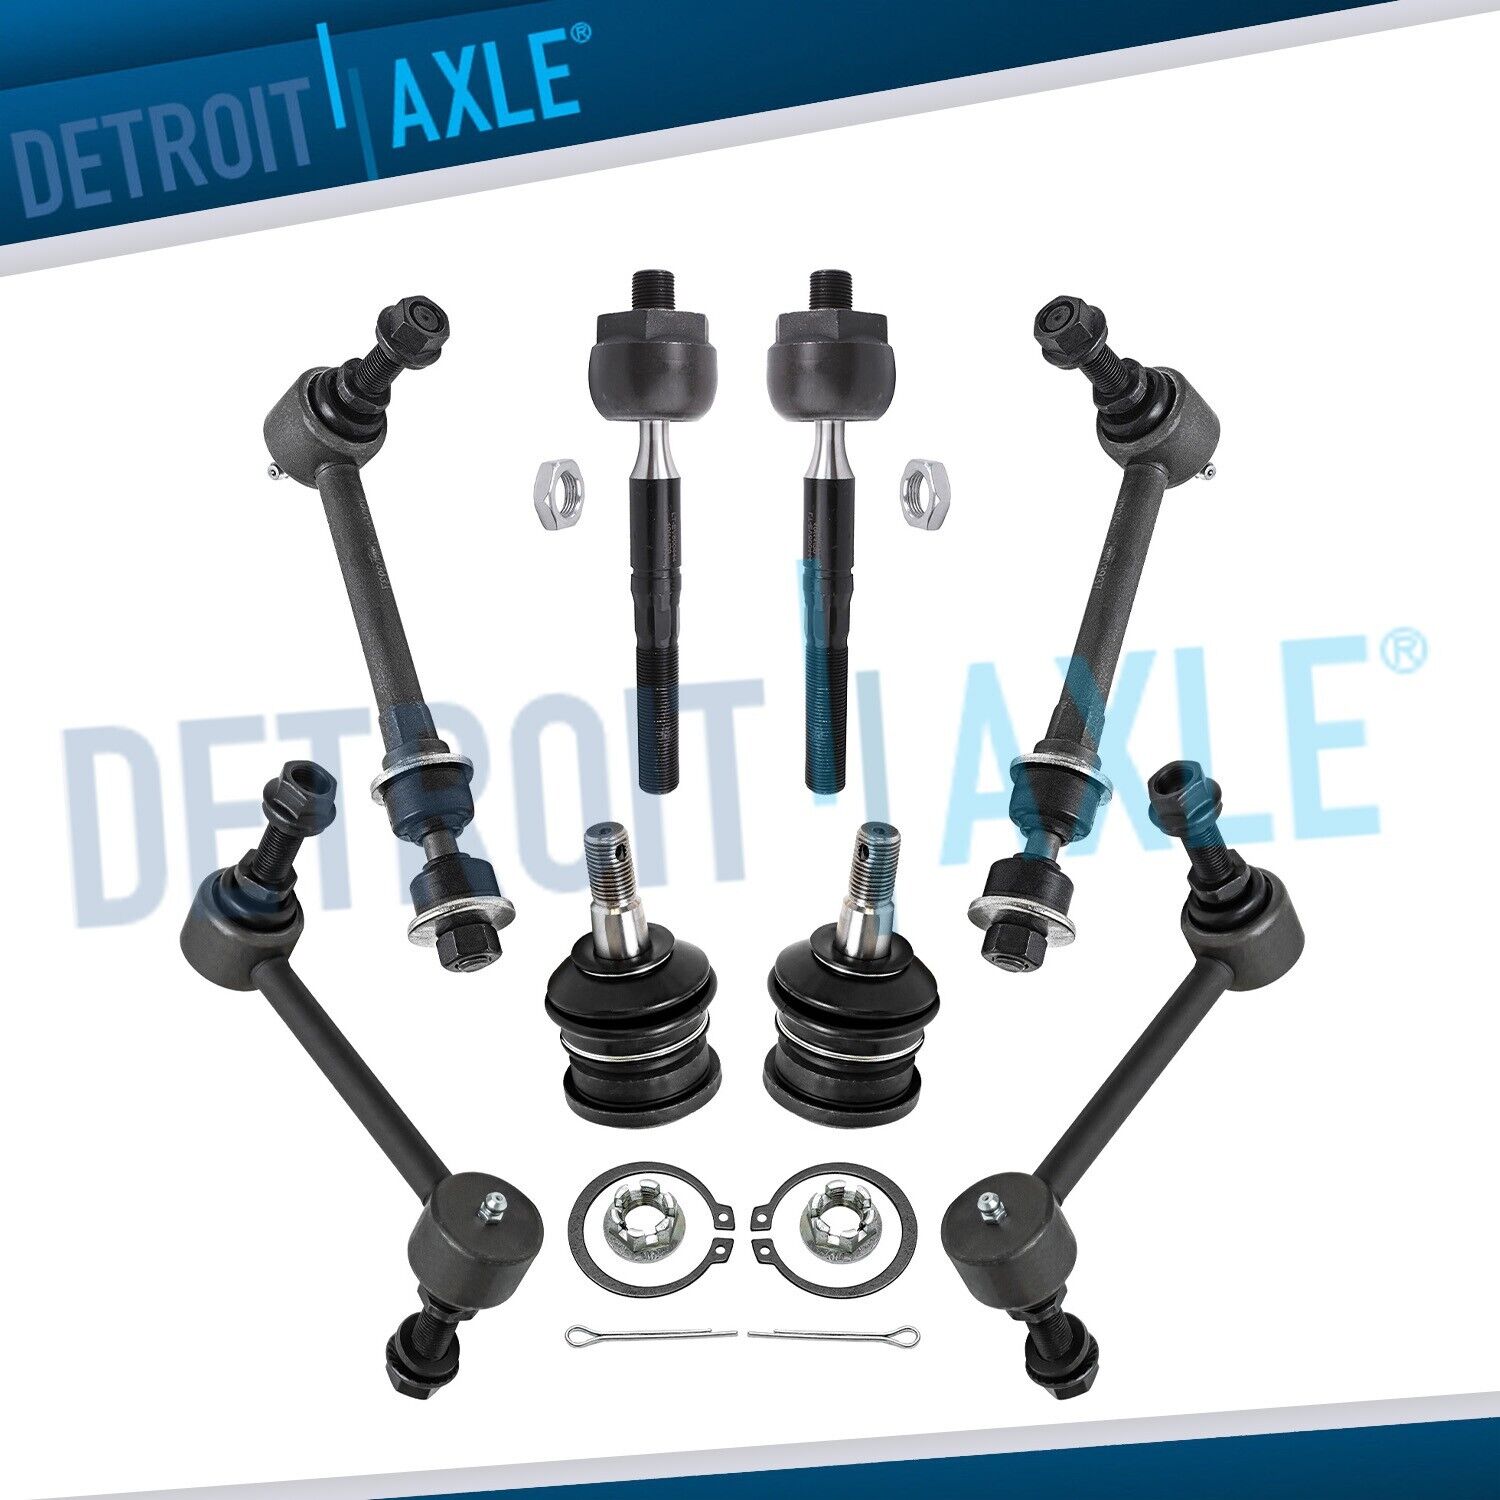 Brand New 8pc Complete Front & Rear Suspension Kit for 2001-07 Toyota Sequoia